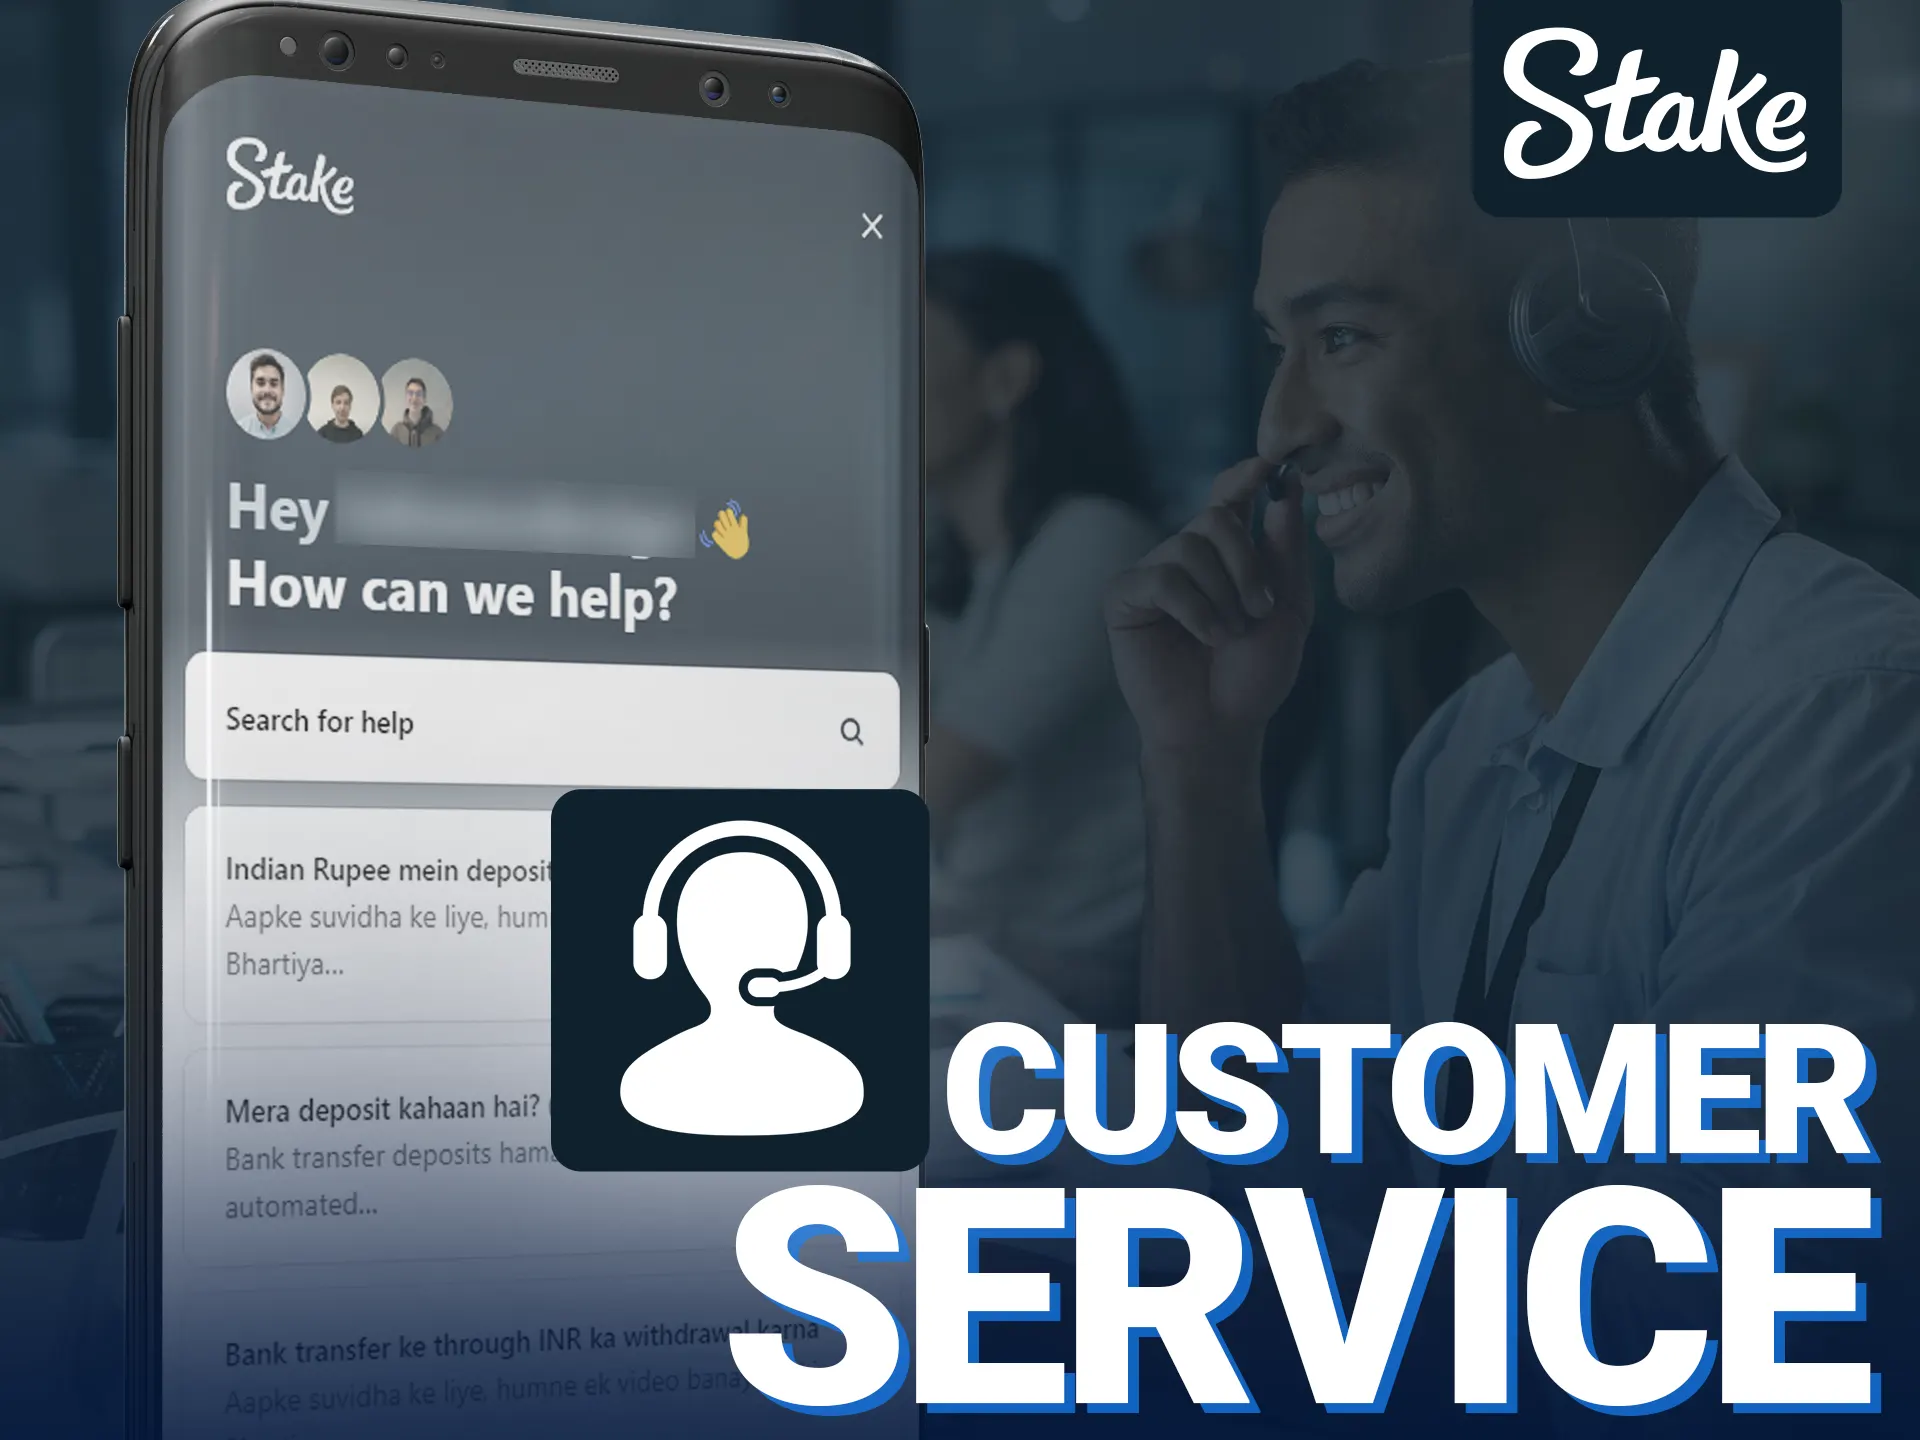 Stake offers customer support via email, chat, and social media.